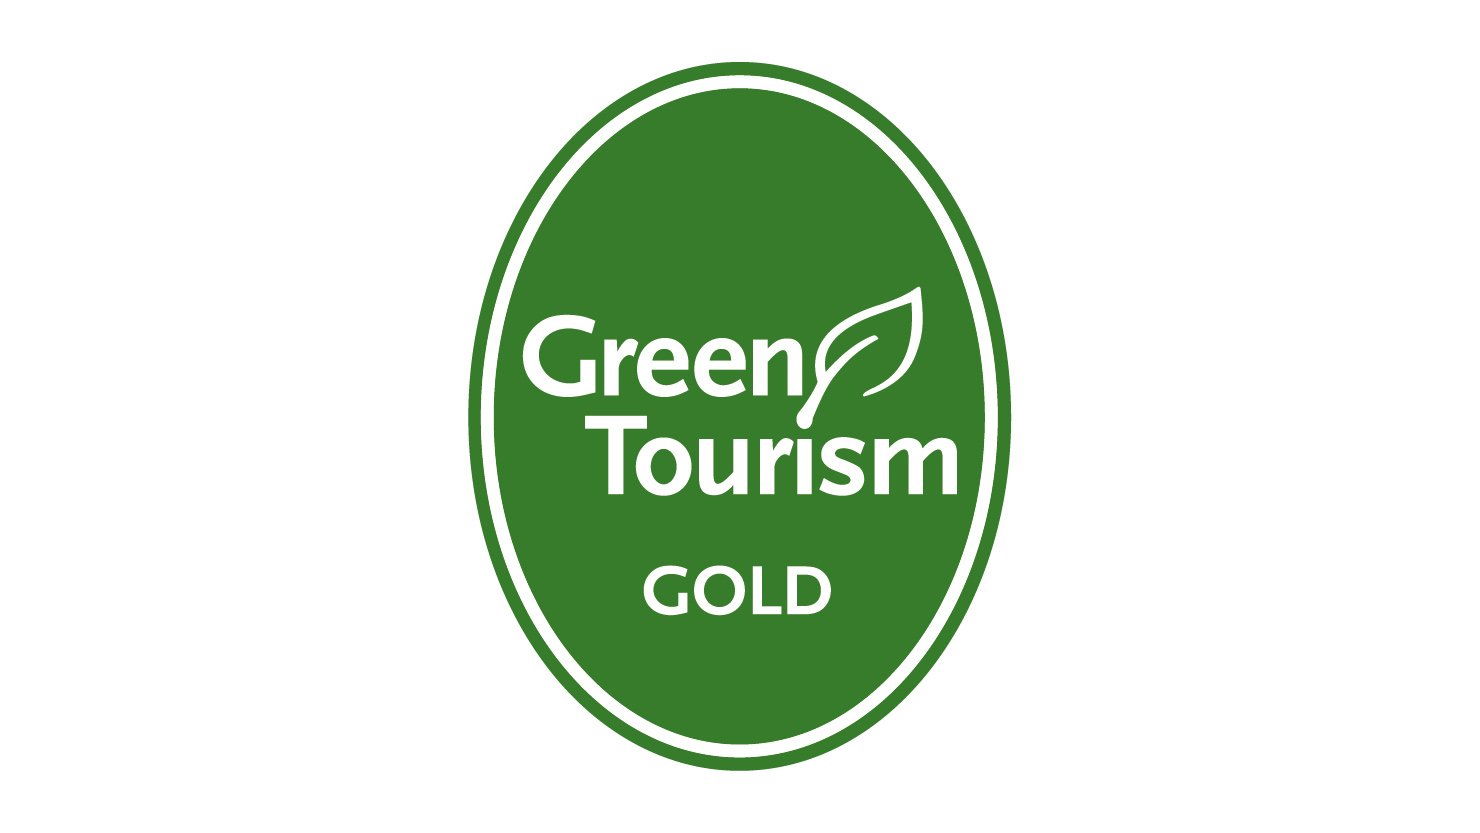 We've been accredited Green Tourism gold! | The Box Plymouth